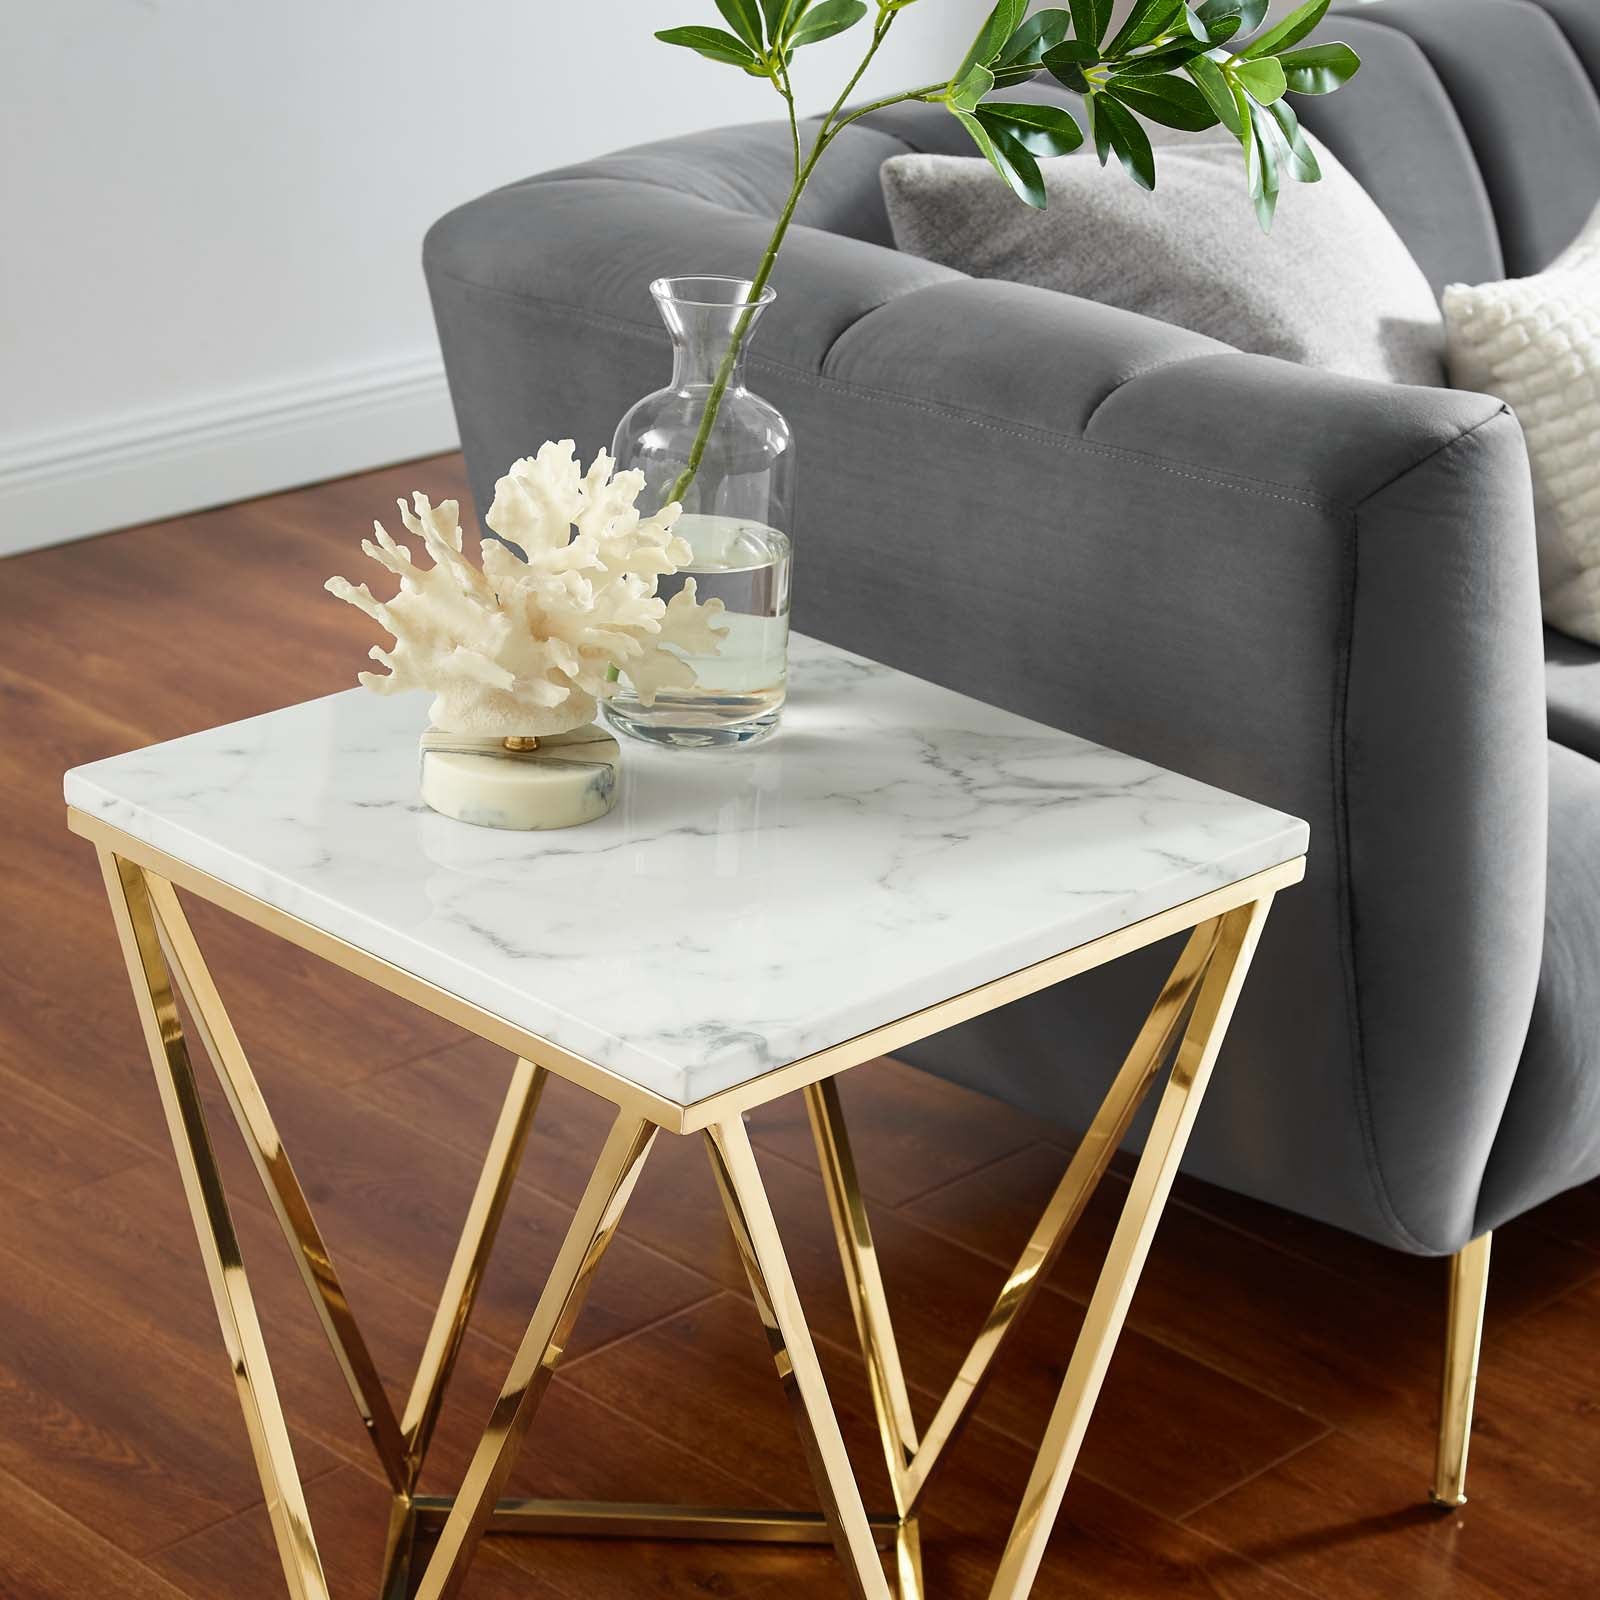 Vertex Gold Metal Stainless Steel End Table-End Table-Modway-Wall2Wall Furnishings